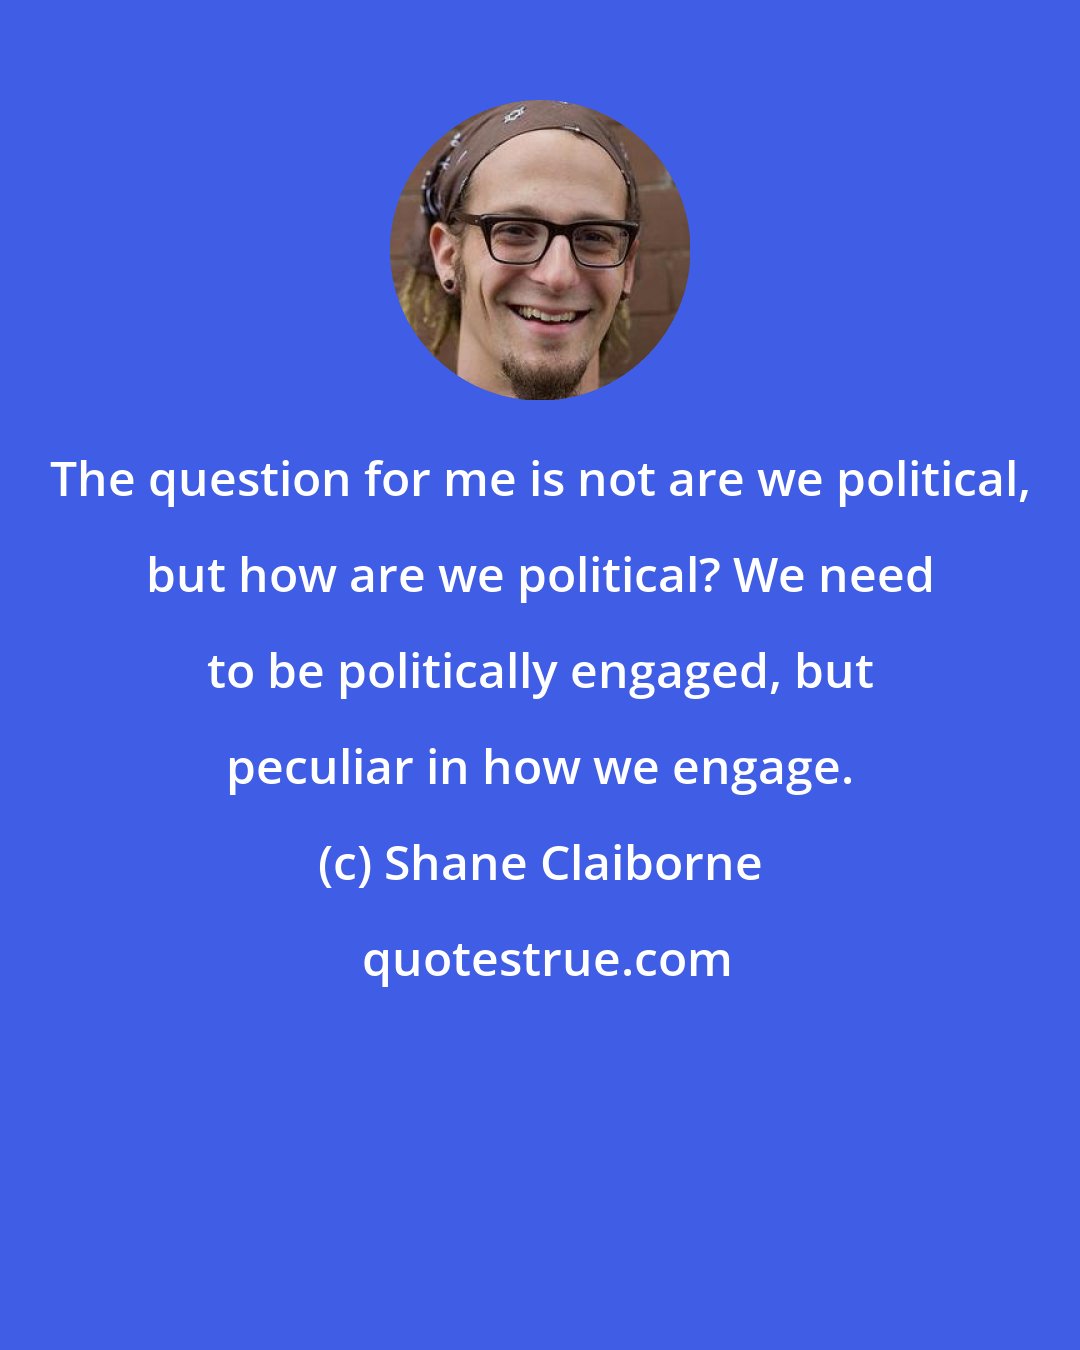 Shane Claiborne: The question for me is not are we political, but how are we political? We need to be politically engaged, but peculiar in how we engage.